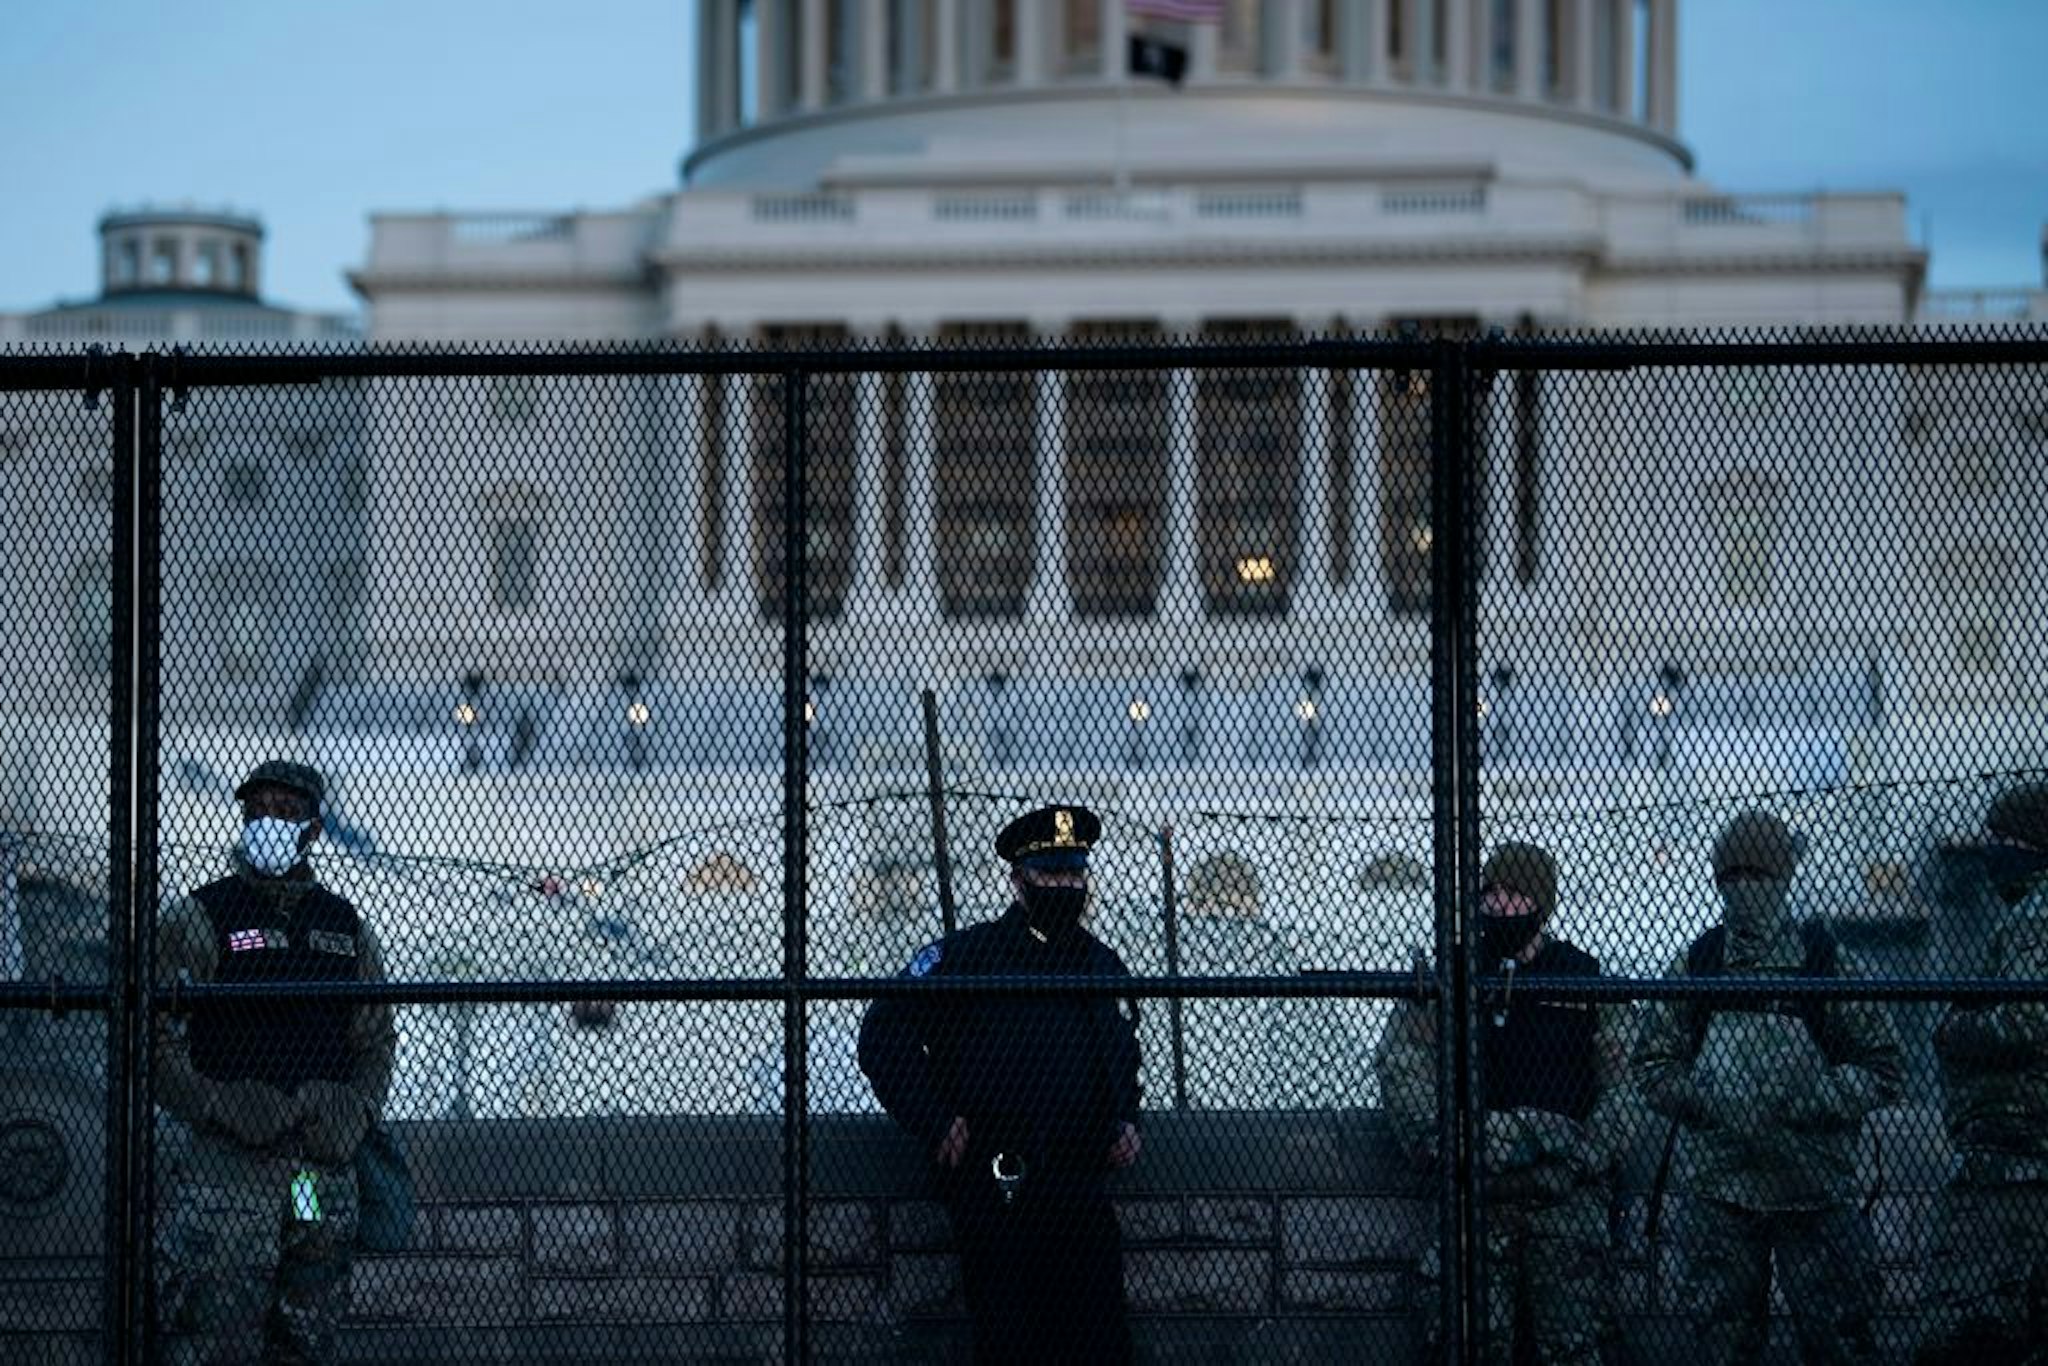 TOPSHOT - A Capitol Police officer stands with members of the National Guard behind a crowd control fence surrounding Capitol Hill a day after a pro-Trump mob broke into the US Capitol on January 7, 2021, in Washington, DC.